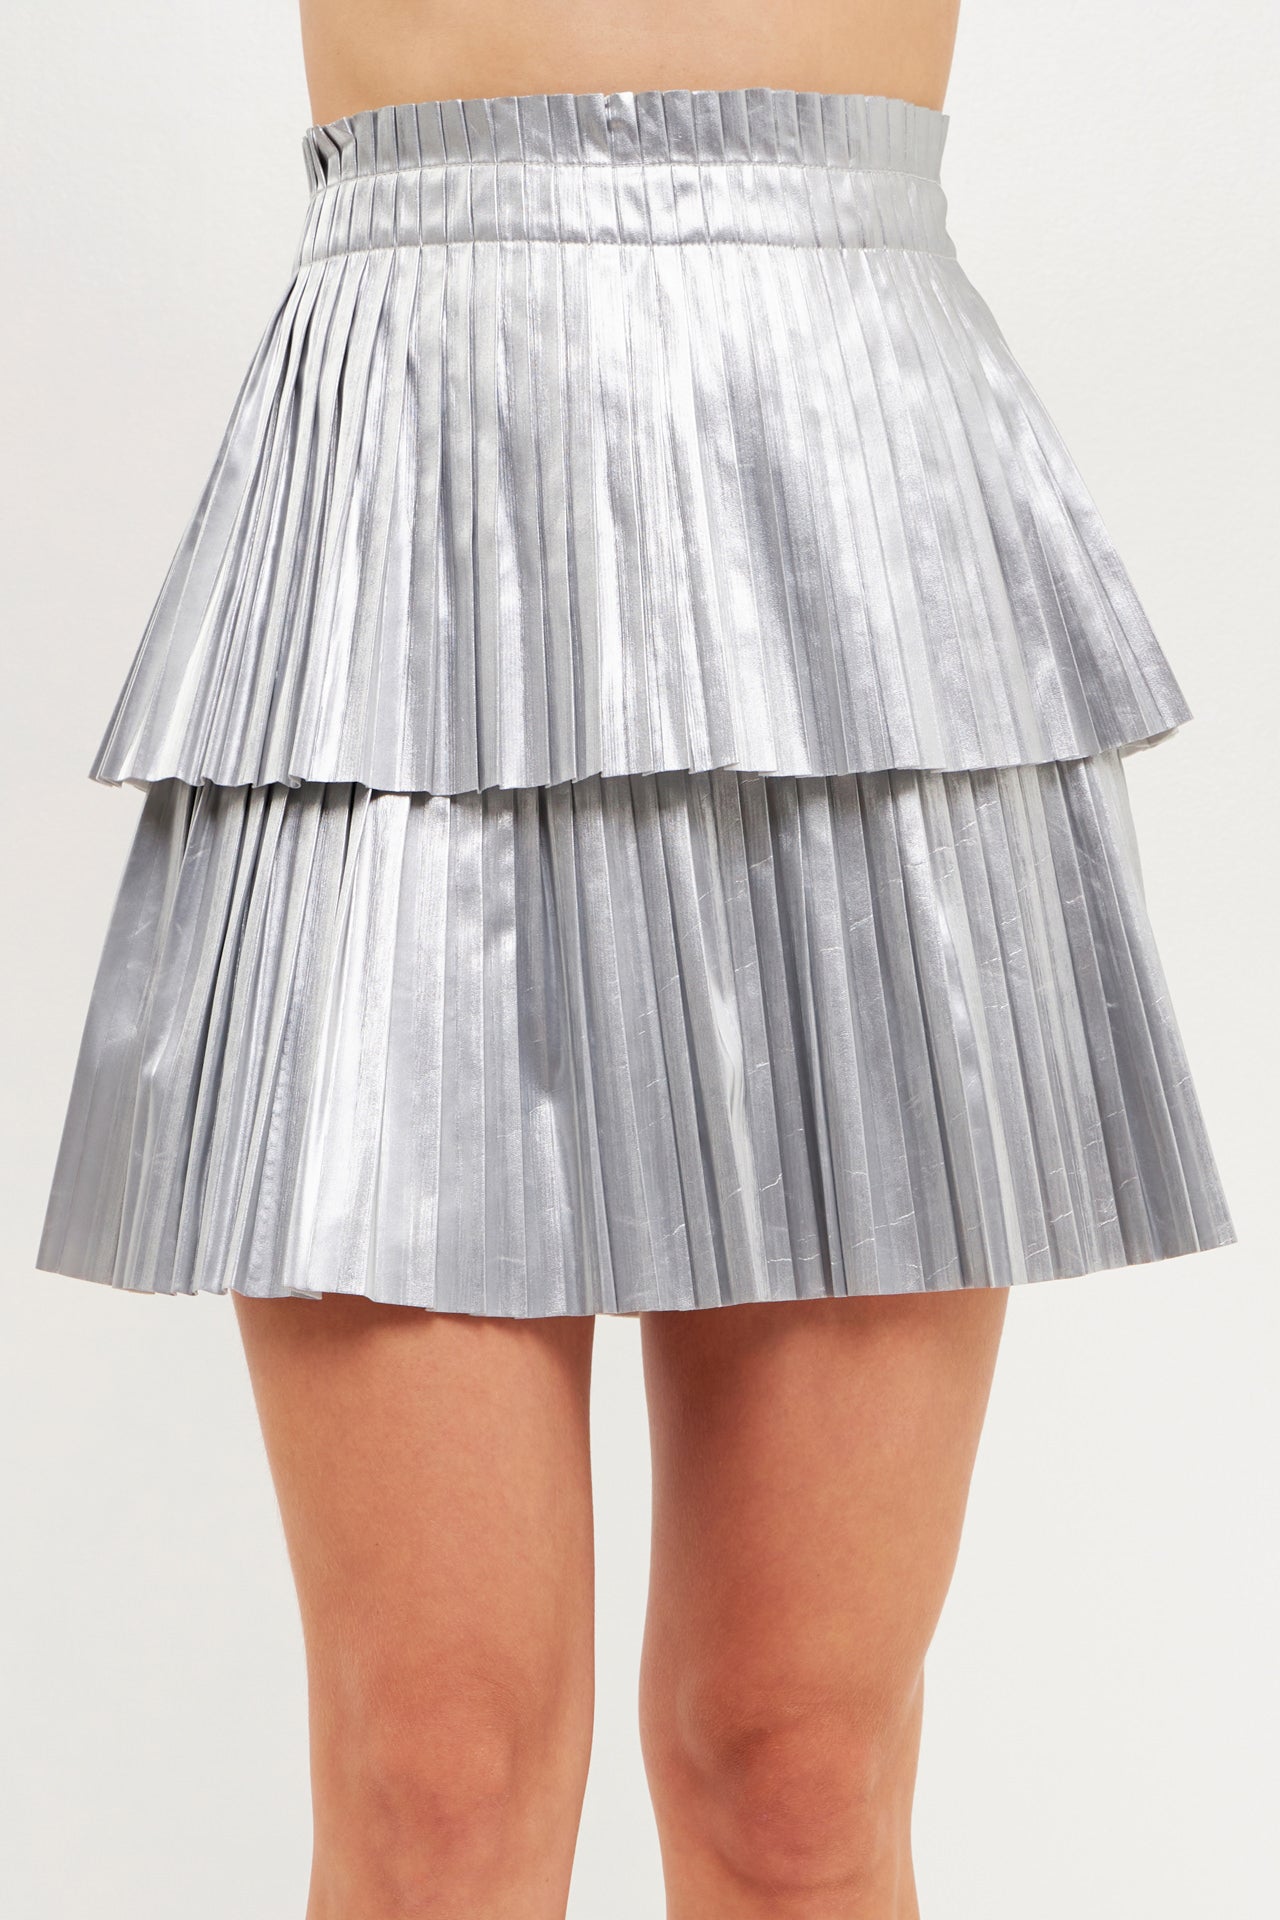 Endless Rose - Shiny Pu Pleated Mini Skirt - Skirts in Women's Clothing available at endlessrose.com